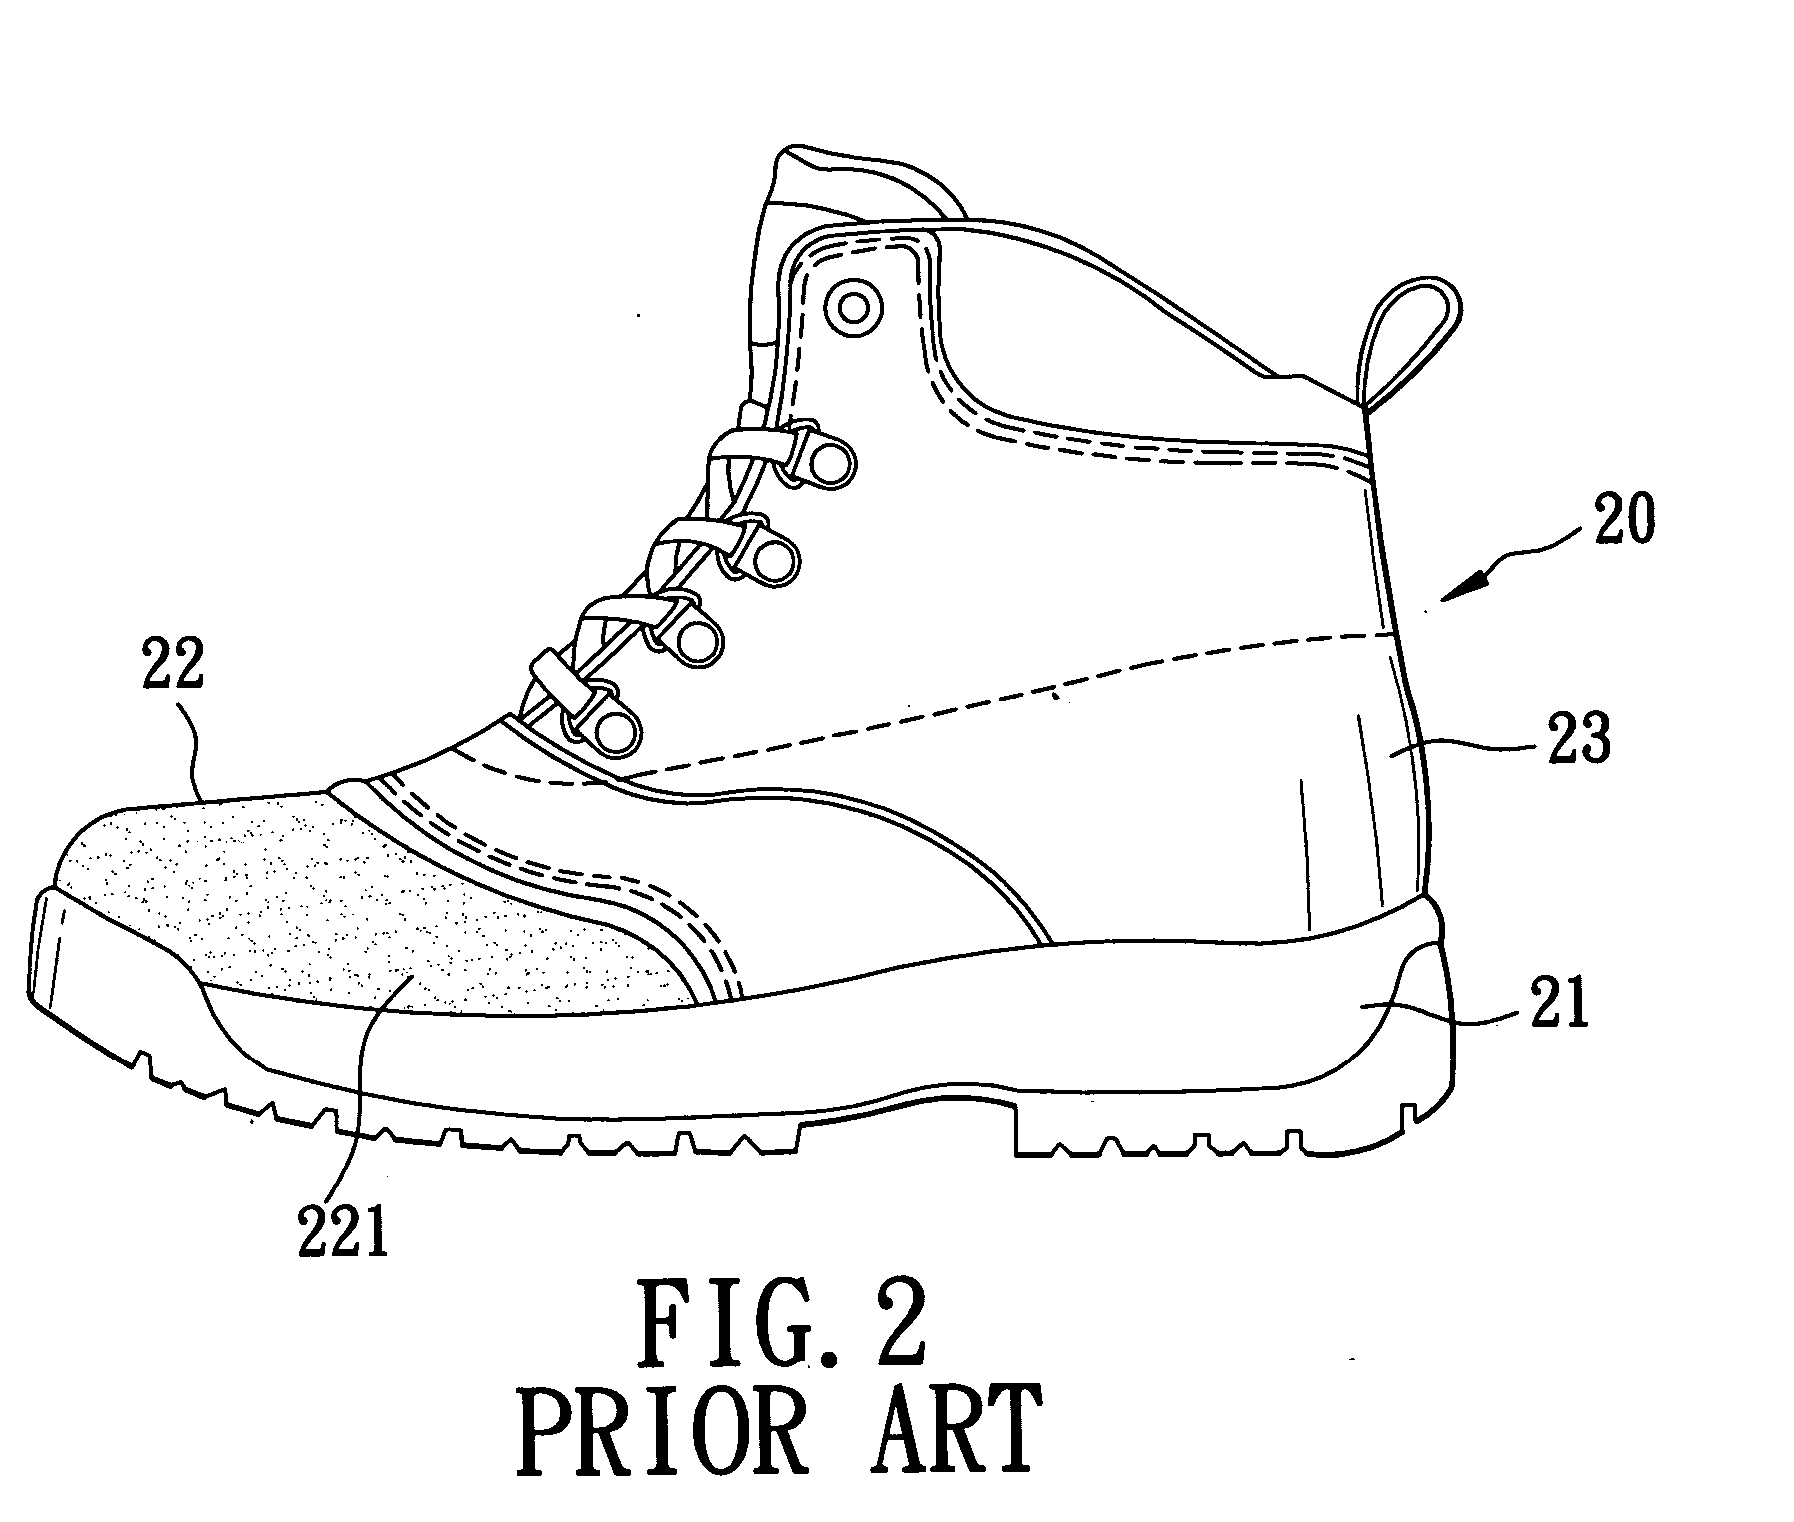 Shoe with shell portions